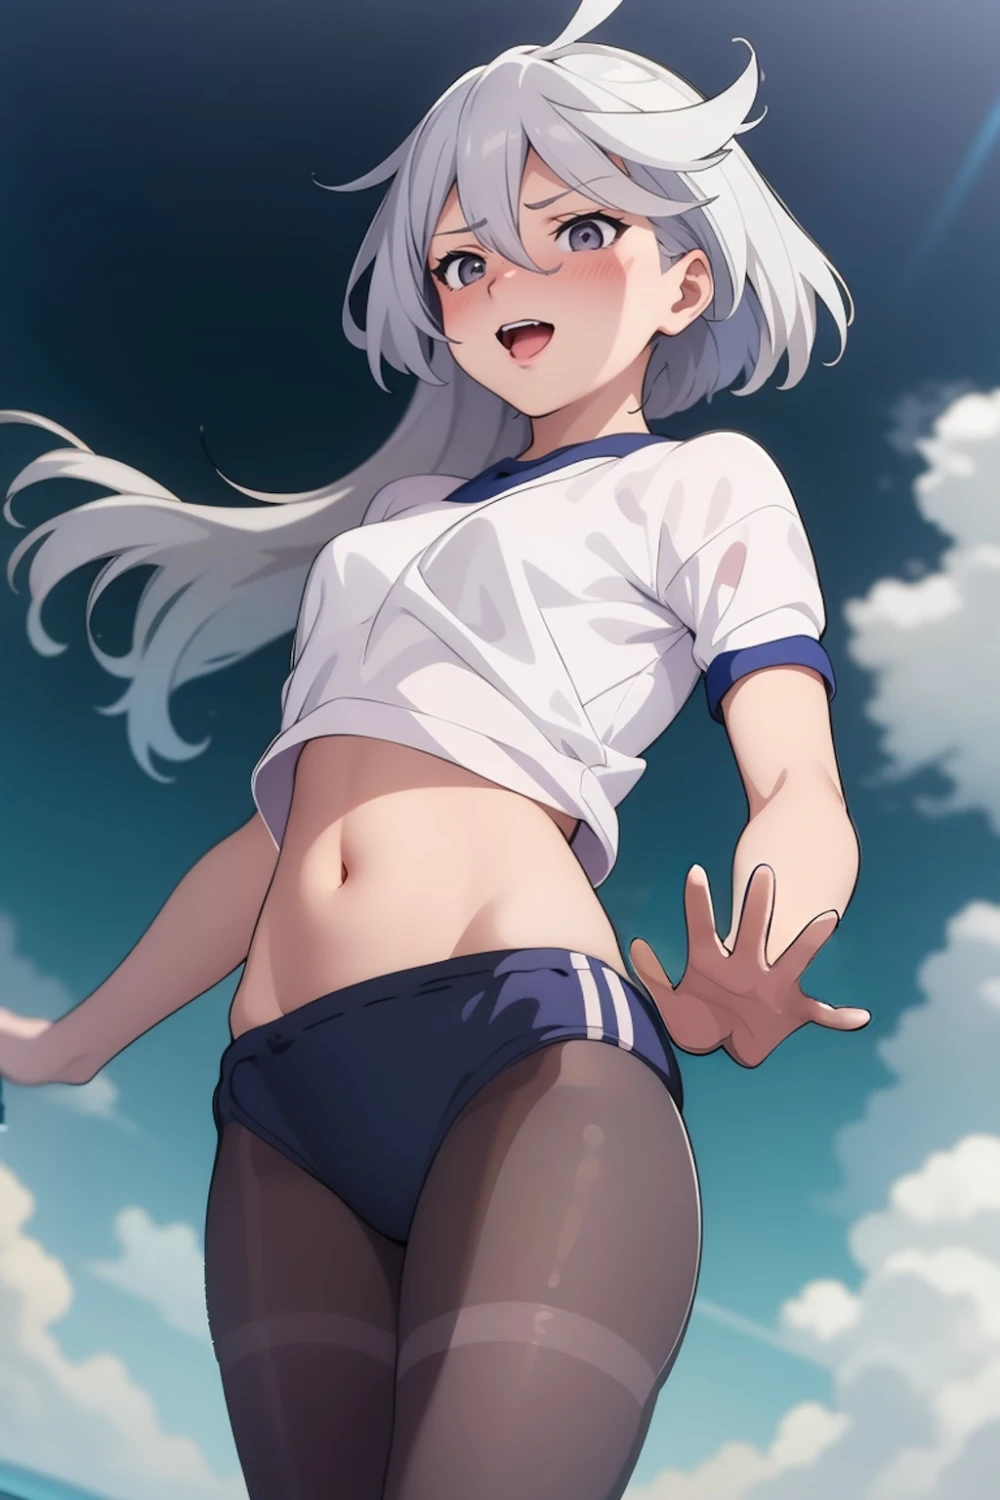 bloomers-anime-style-all-ages-2-6